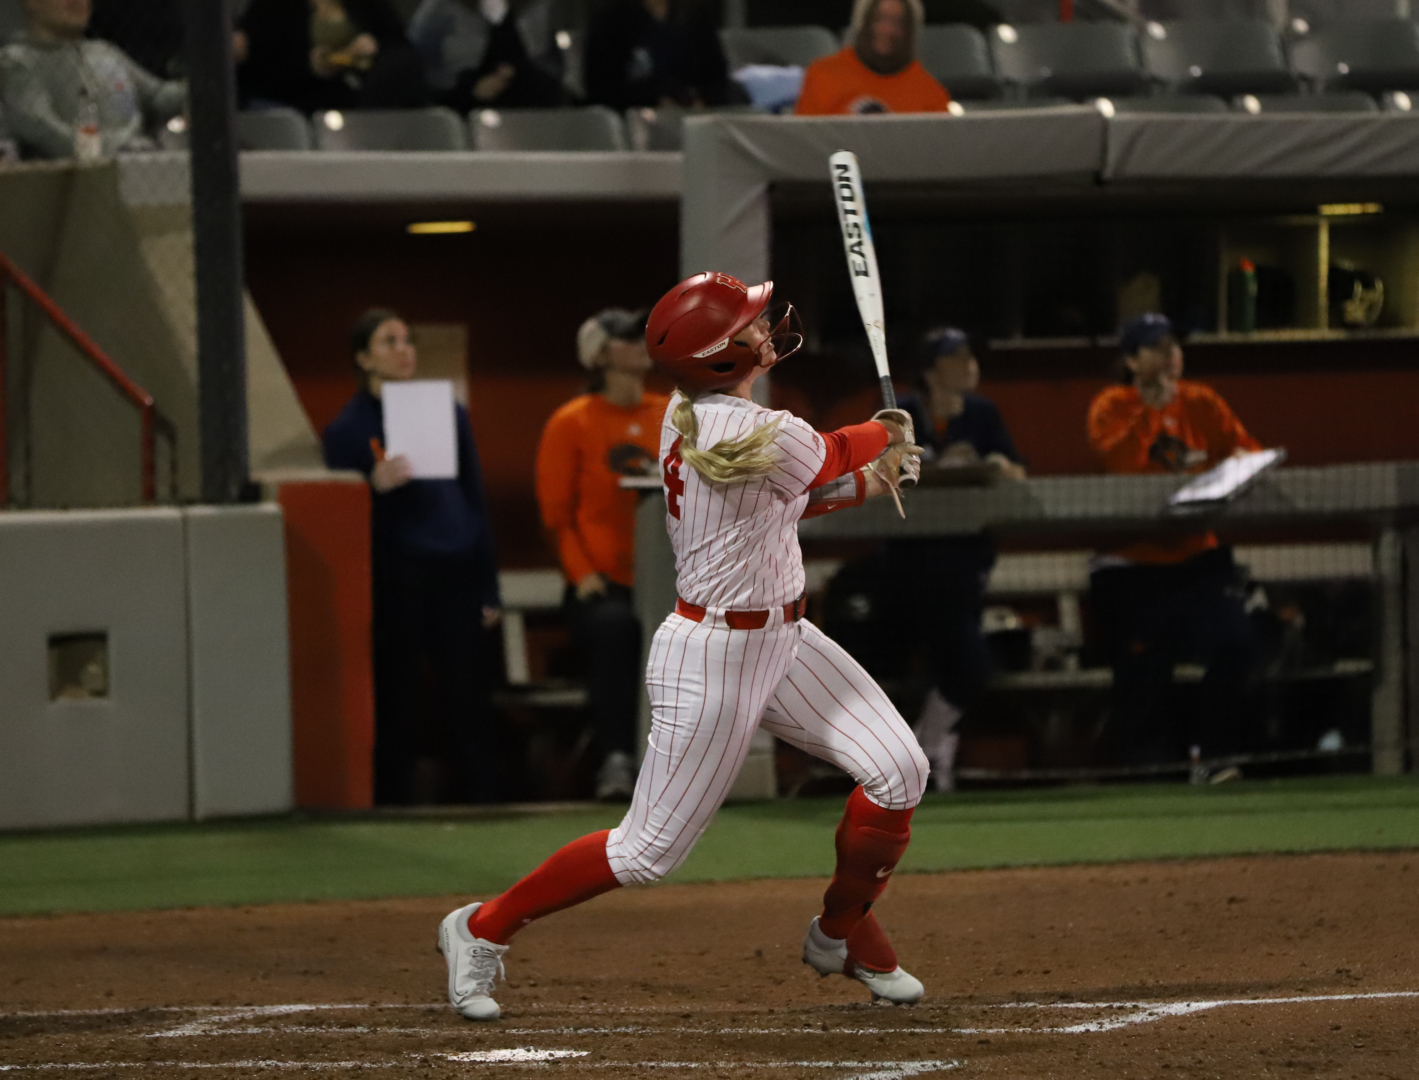 Aspen Howie belted a solo home run for UH softball in Saturday's series finale against Wichita State. | Sean Thomas/The Cougar